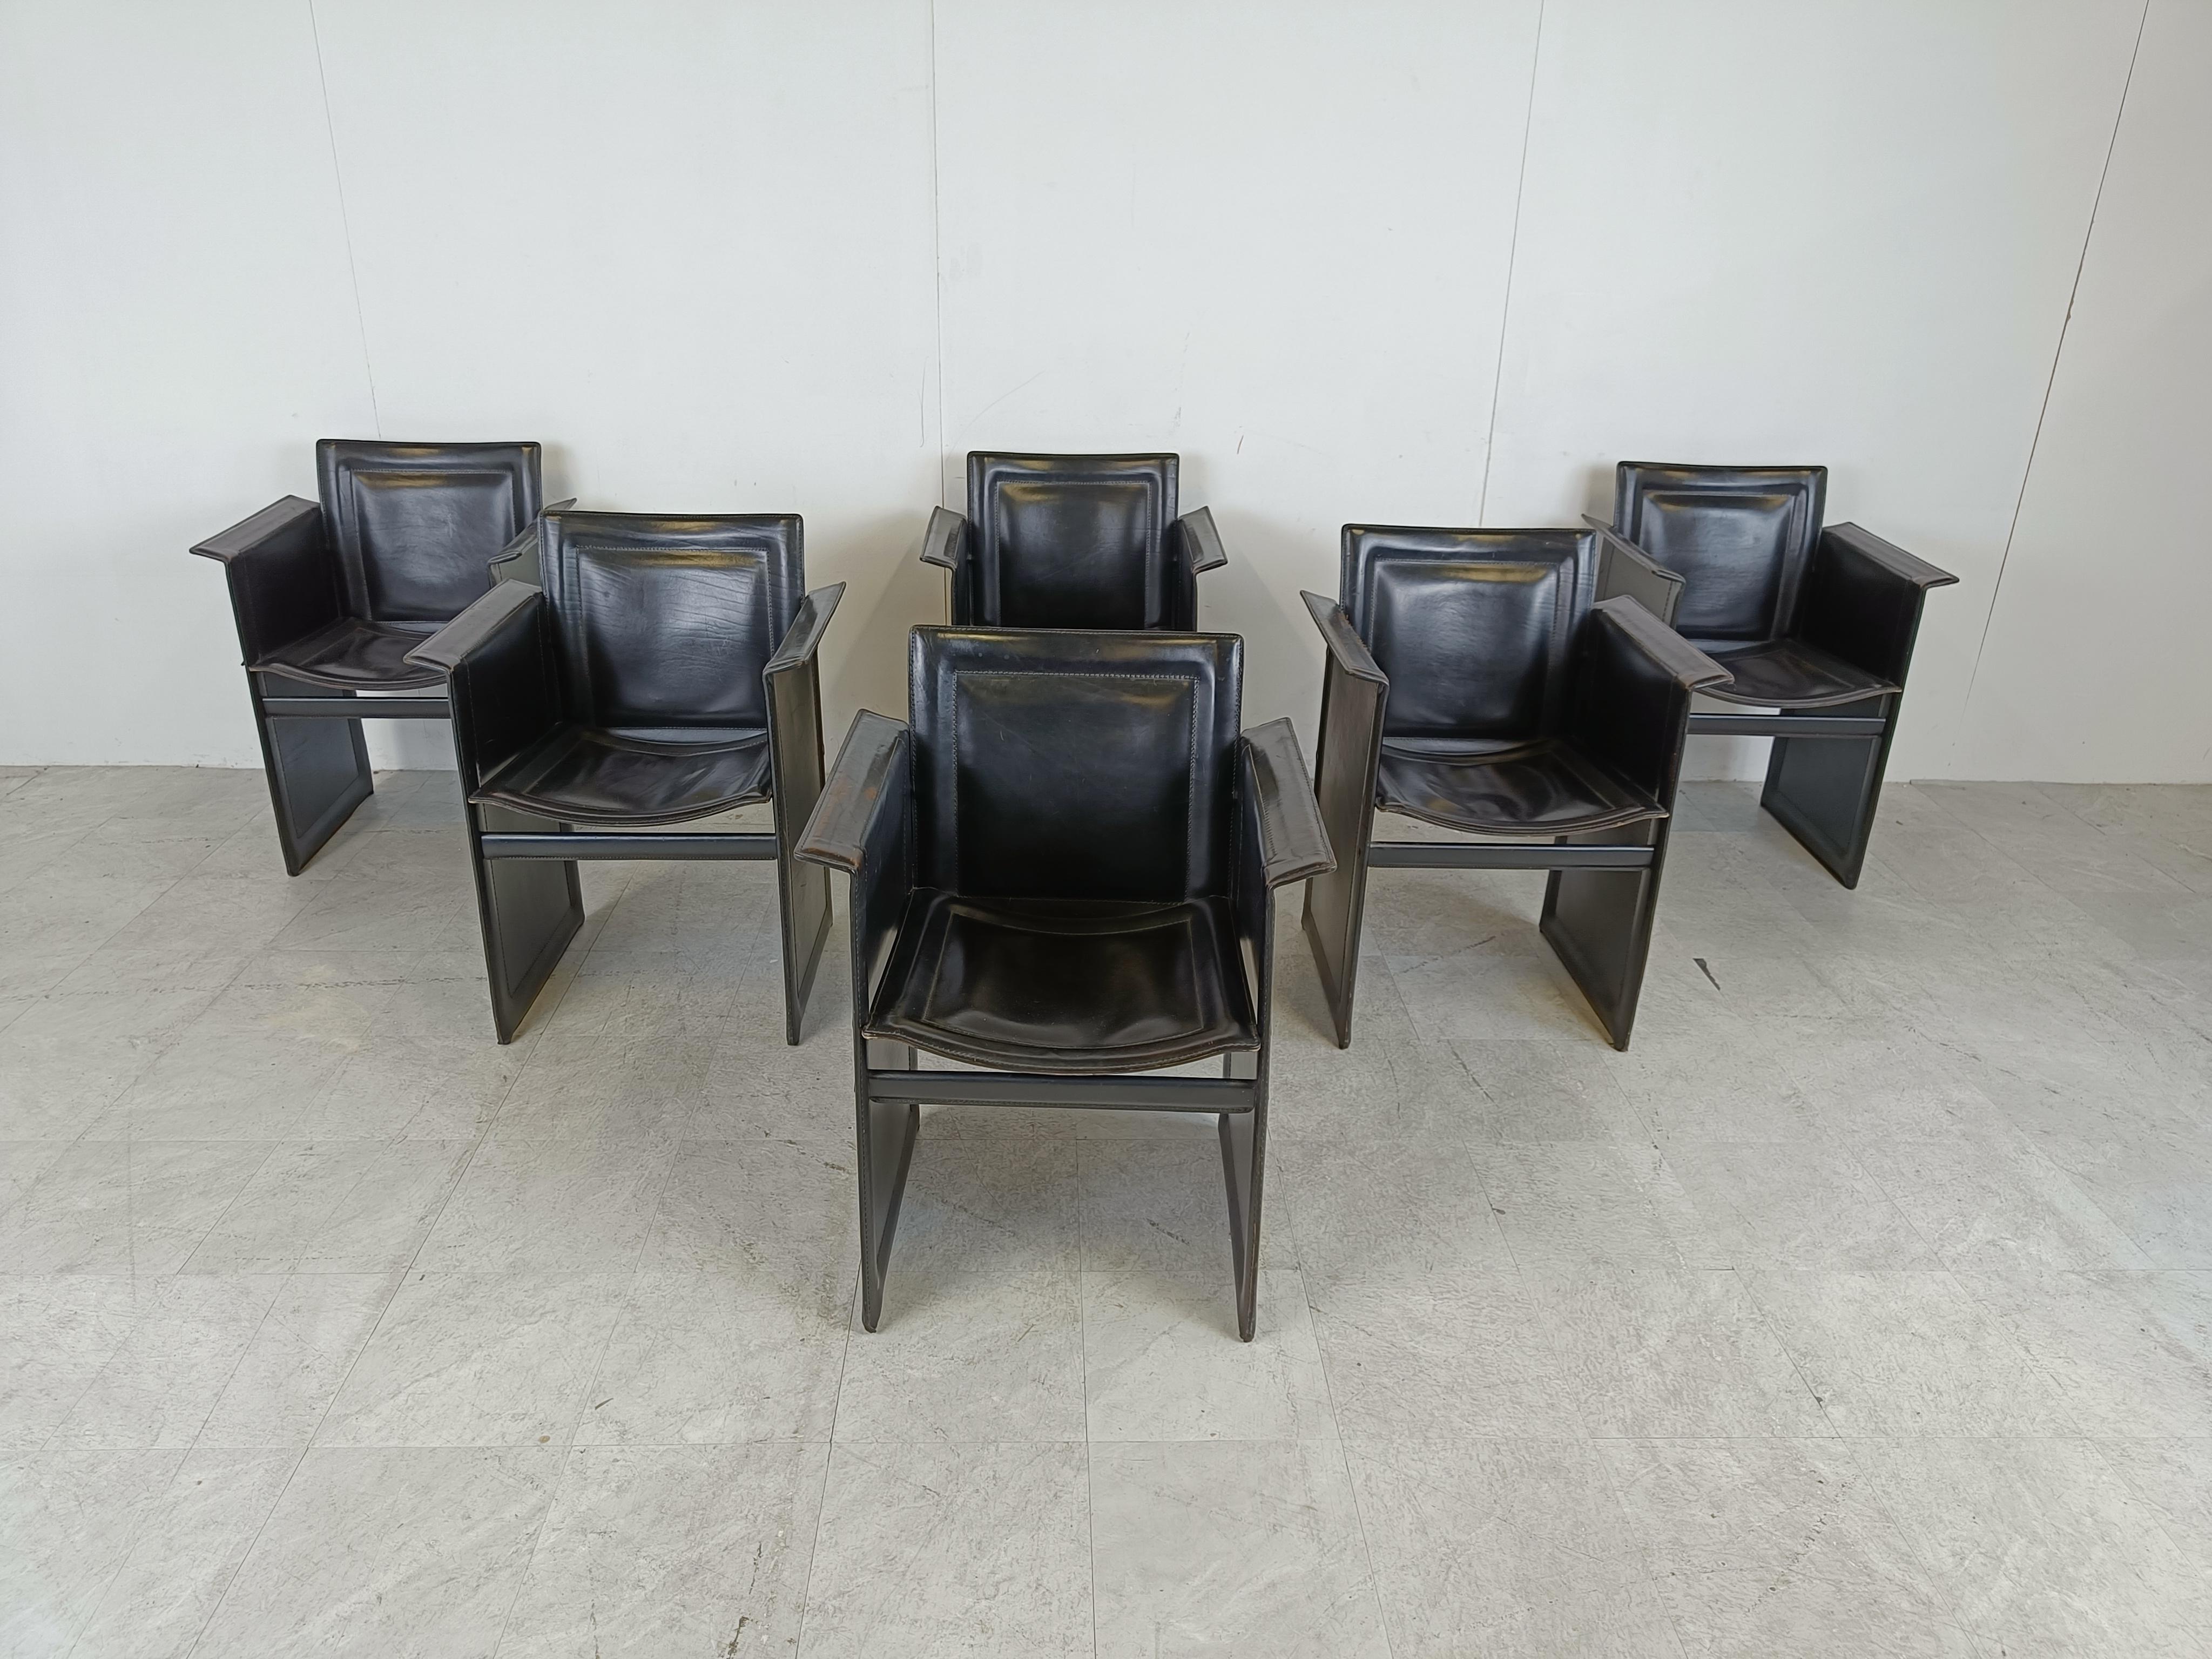 Set of 6 black leather armchairs by Arrben Italy.

The chairs have wear and tear, two have some clear wear on the armrests, the other 4 are in good used condition.

1970s - Italy

Dimensions
Height: 80cm/31.49